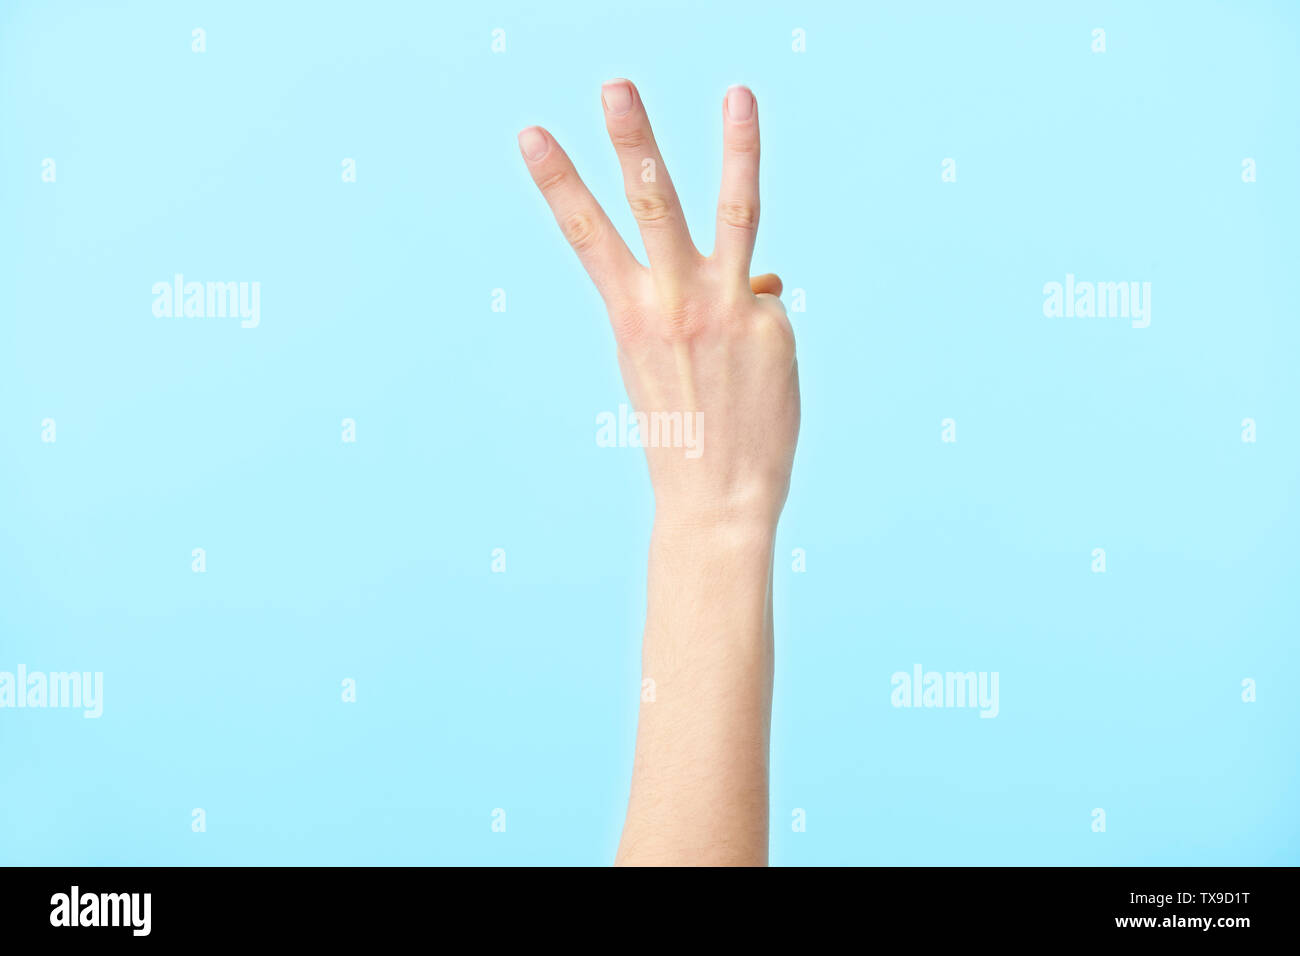 human hand showing number three, isolated on blue background Stock Photo